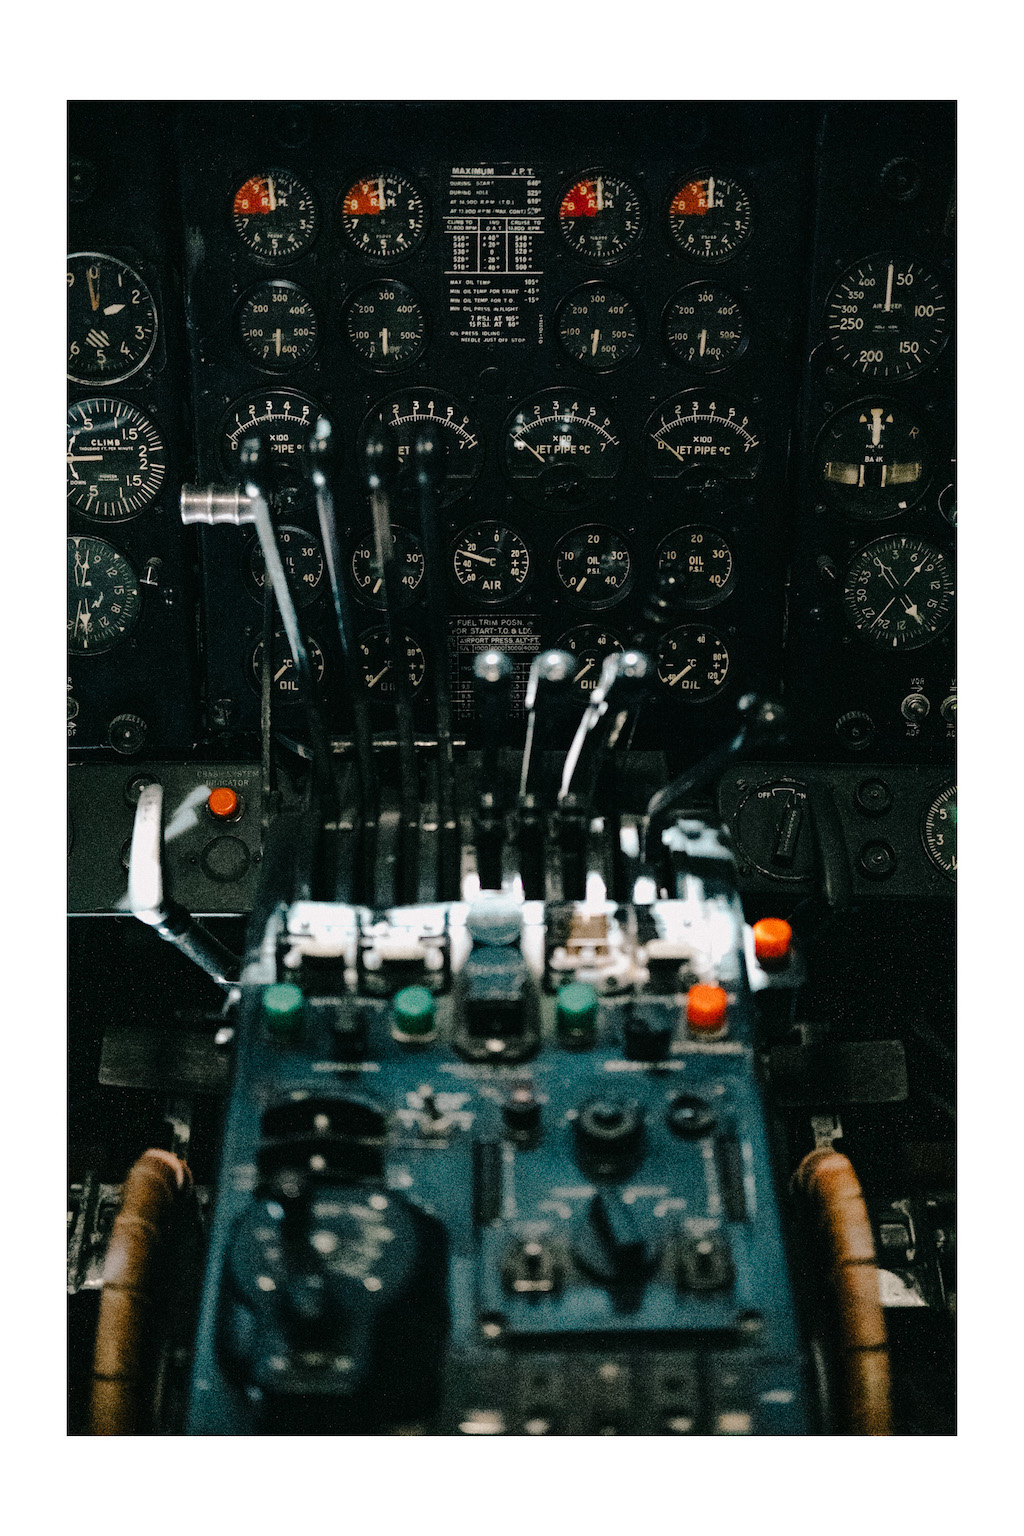 Close-up shot of controls inside the cockpit of the Vickers Viscount on display at the Royal Aviation Museum